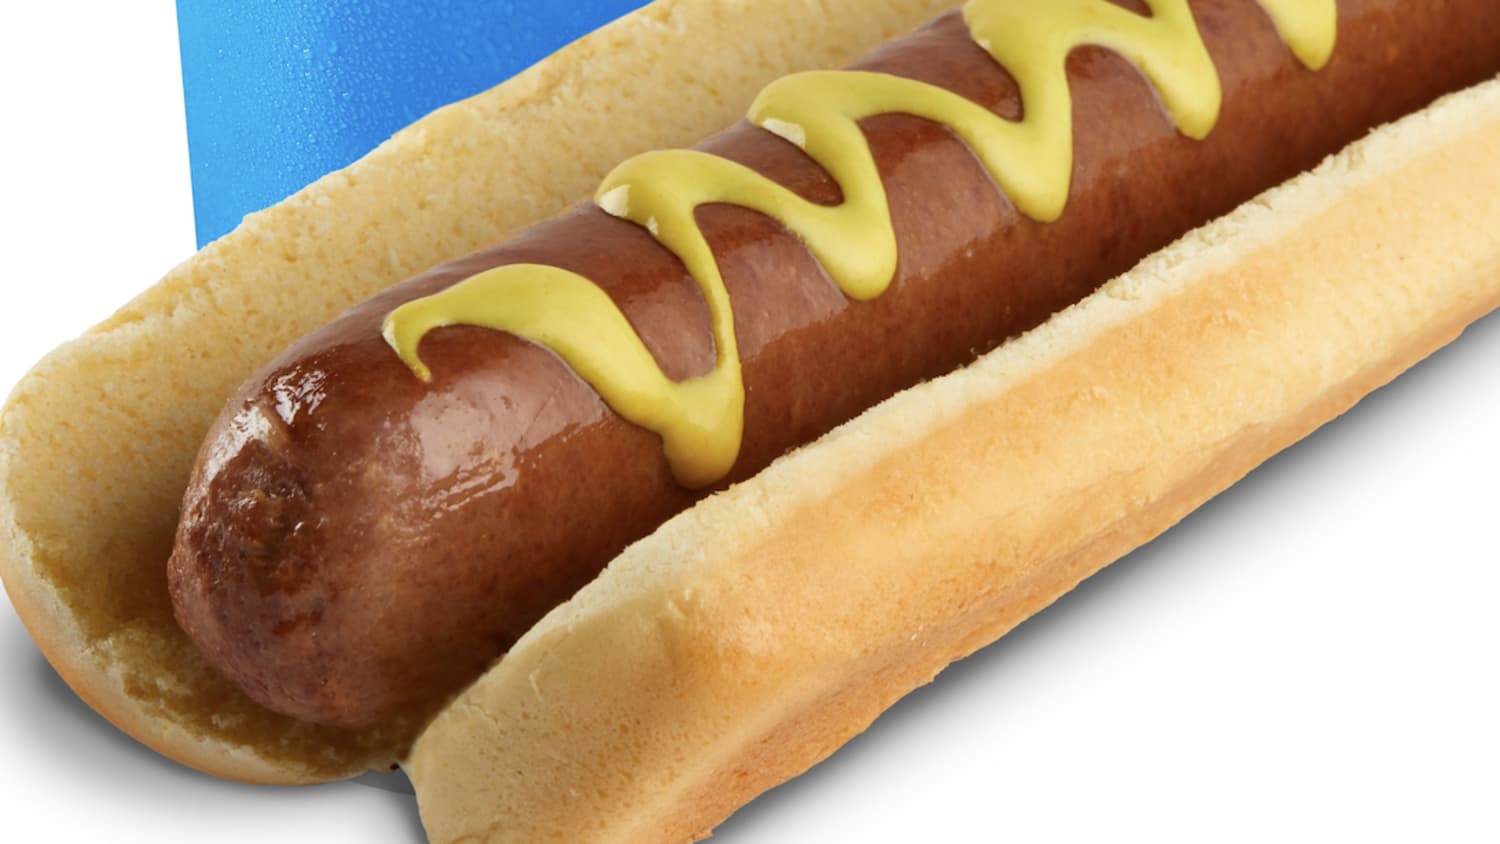 Why Everyone Is Talking About the Sam's Club Hot Dog Deal